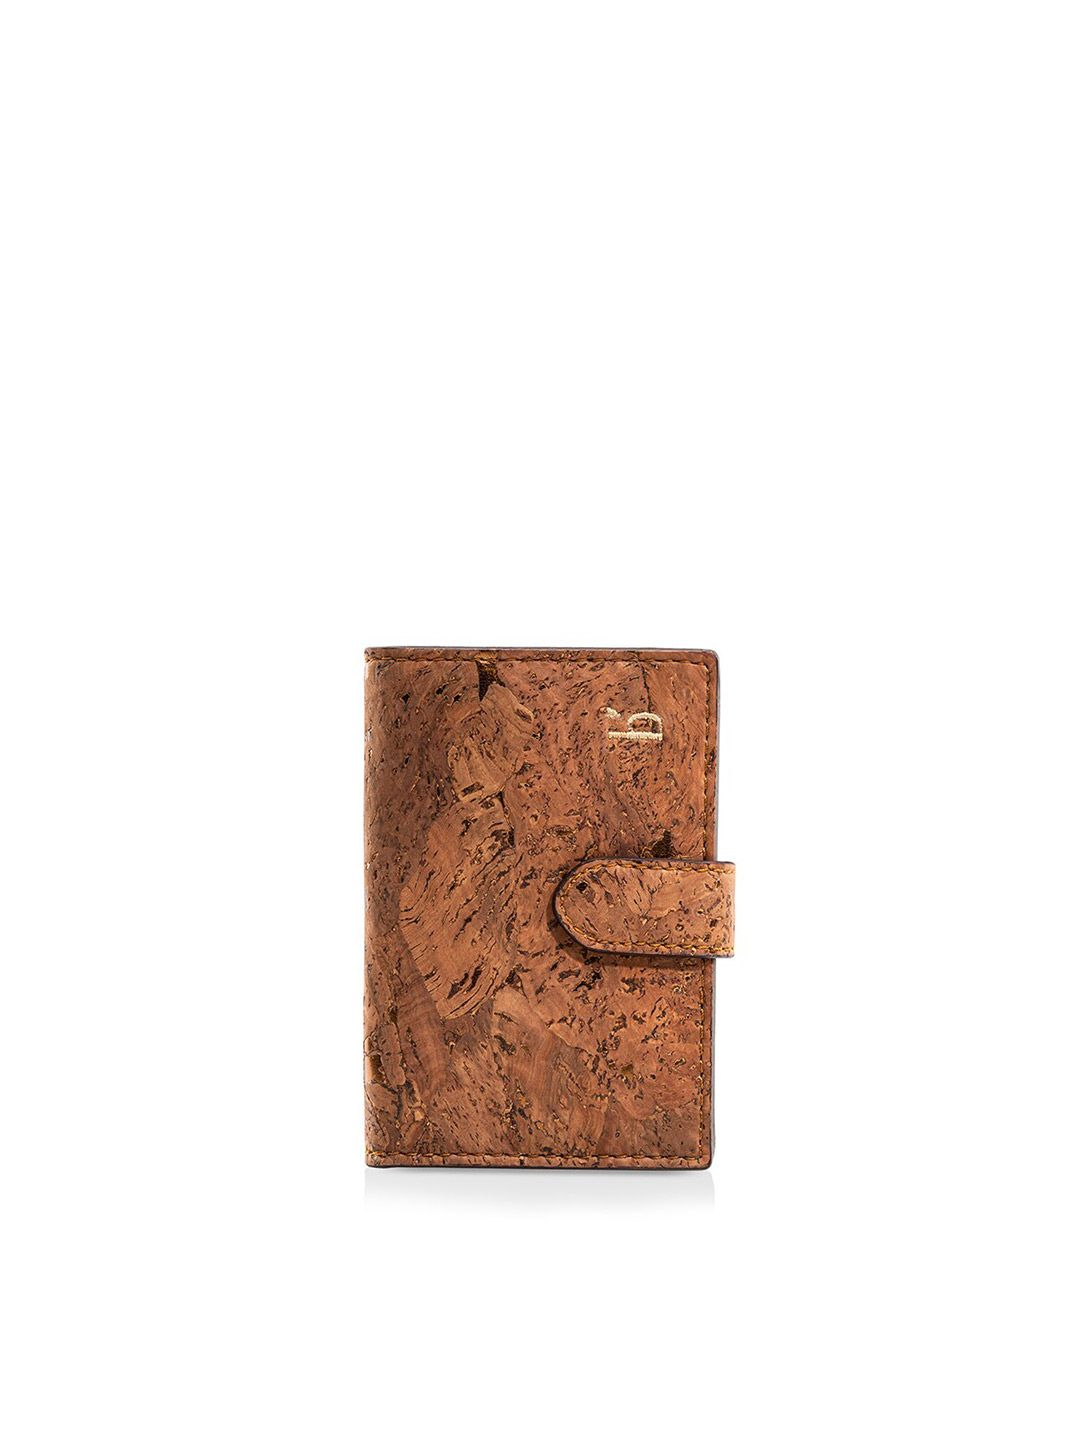 Beej Unisex Copper-Toned Textured Two Fold Wallet Price in India